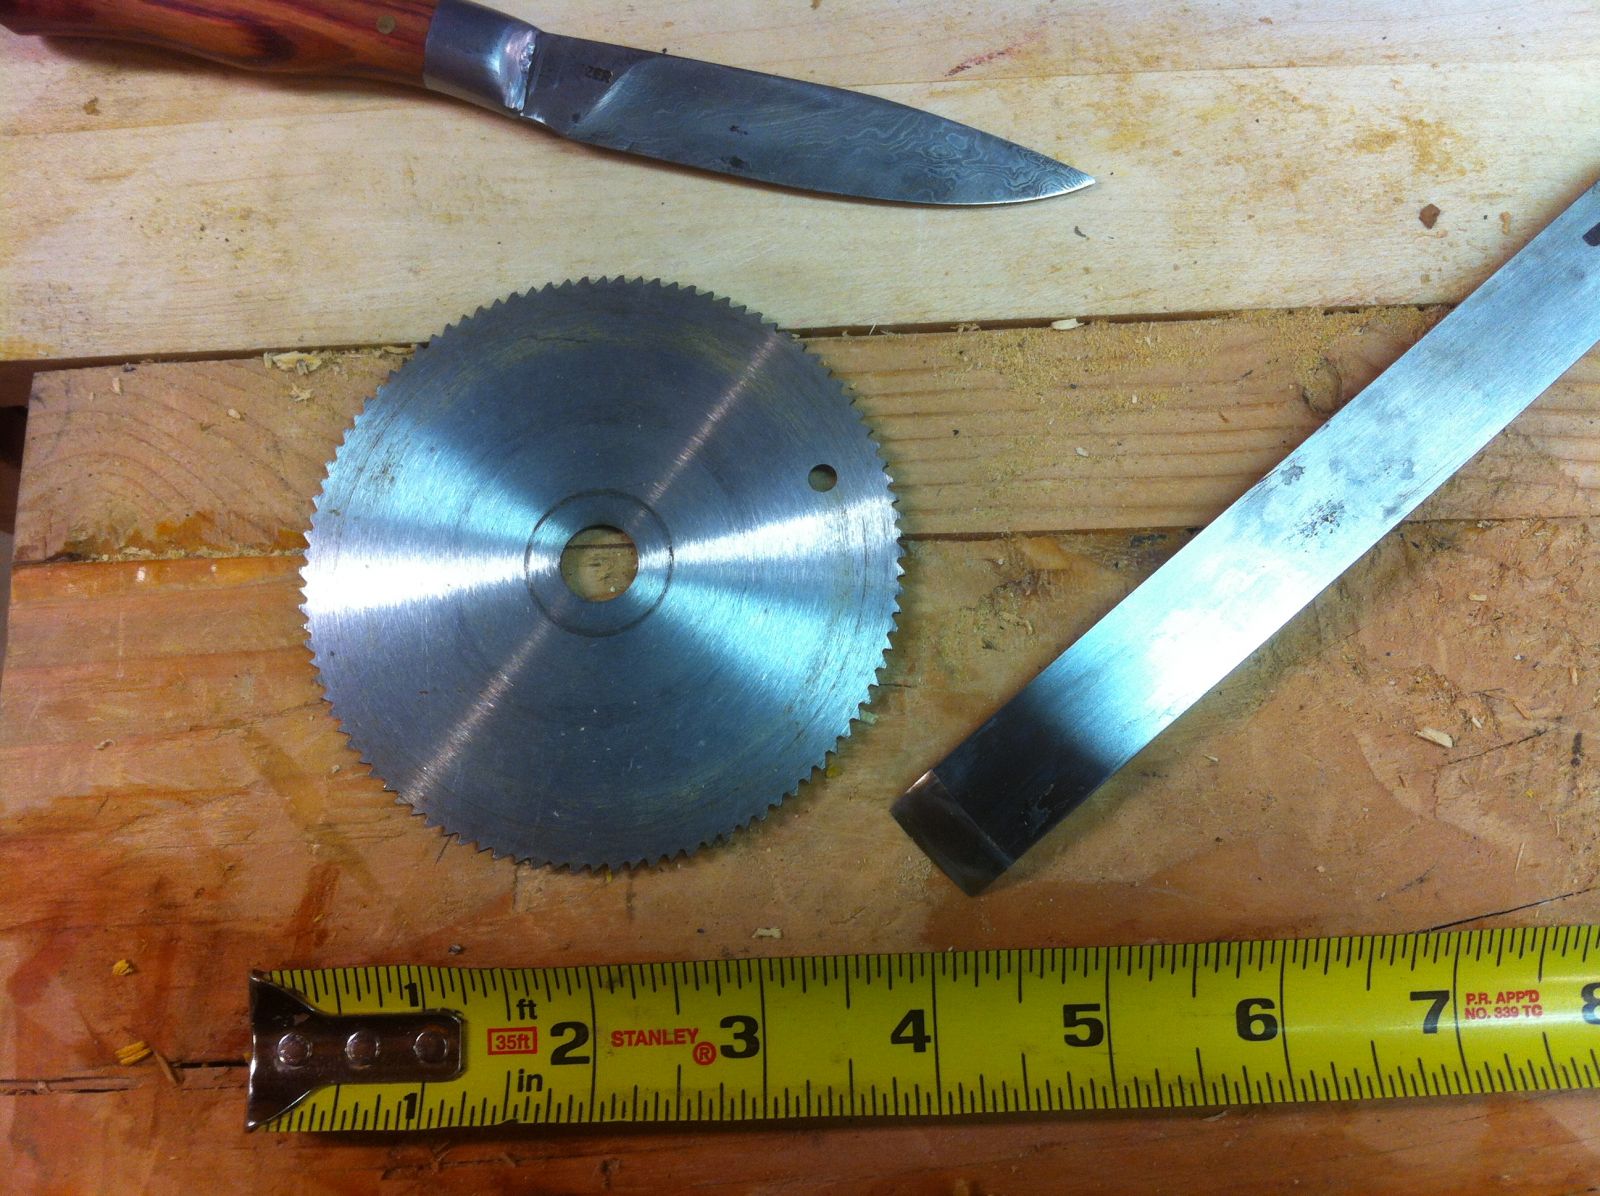 Making a head or round knife